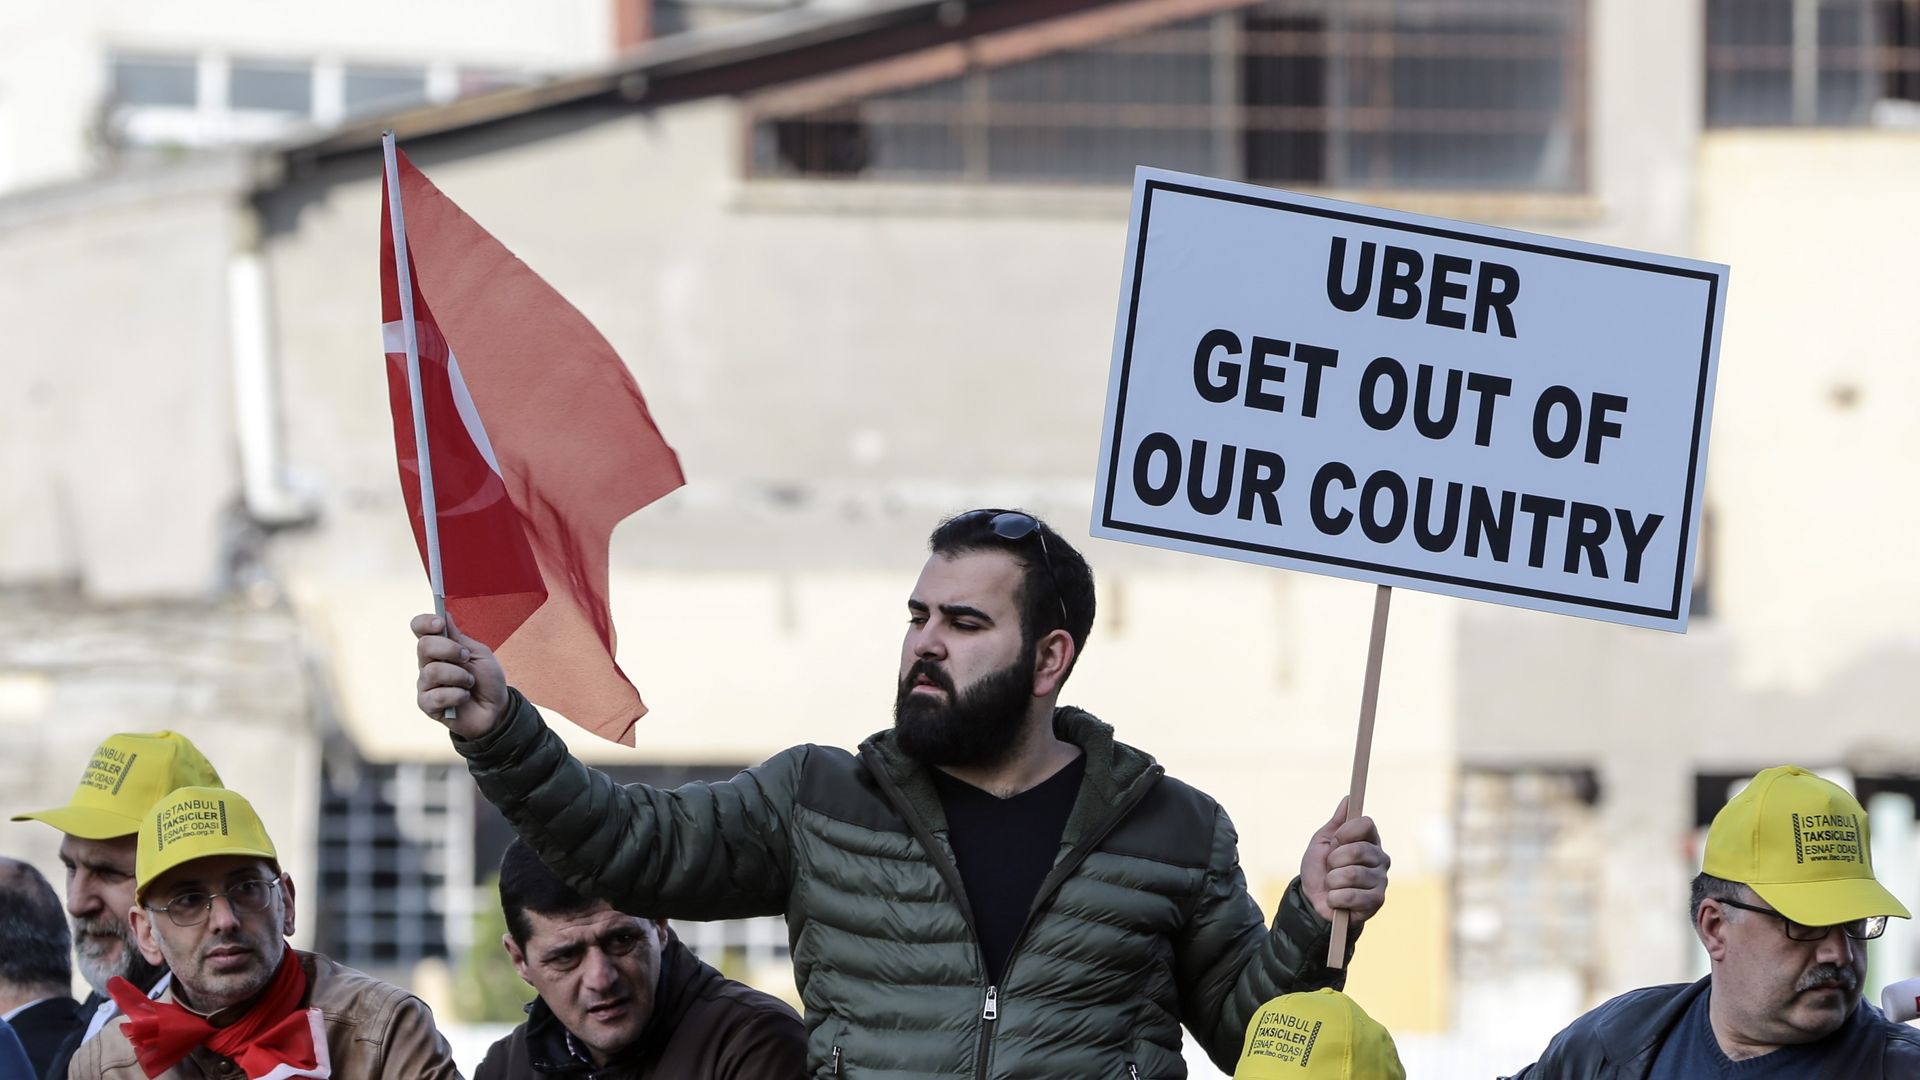 Man holds a Turkish flag in one hand and a sign that reads "Uber get out of our country" in the other.